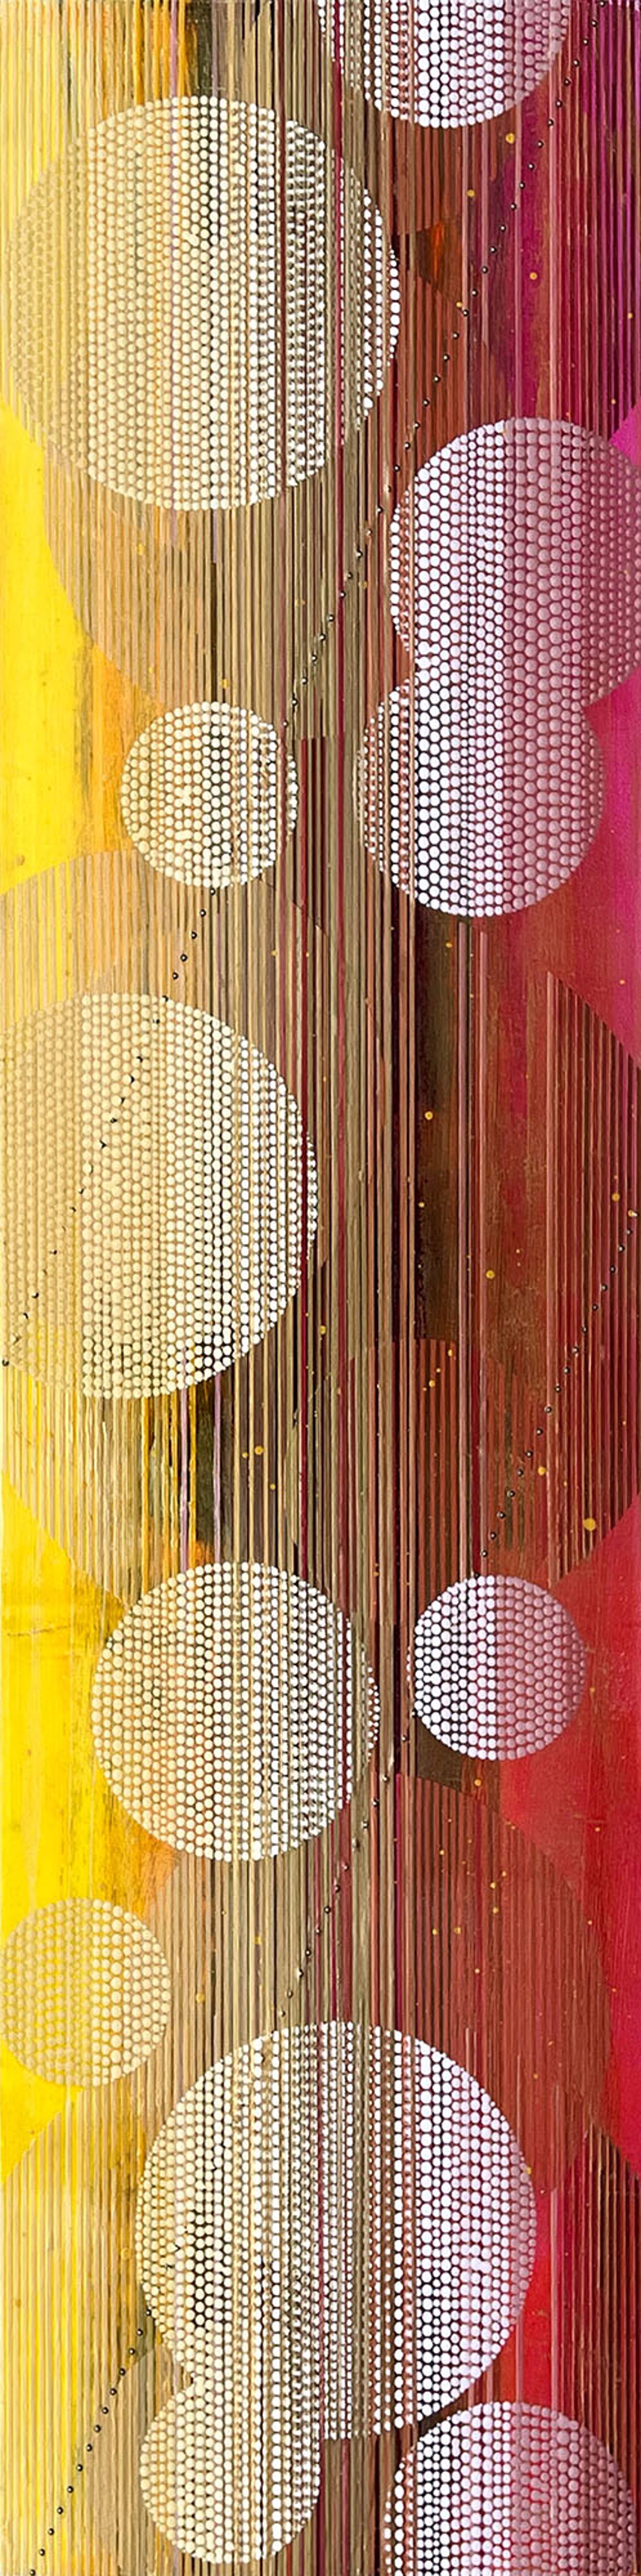 Original Mixed Media Abstract Painting By Nina Tichava Featuring Lantern Motifs In Red To Yellow Gradient